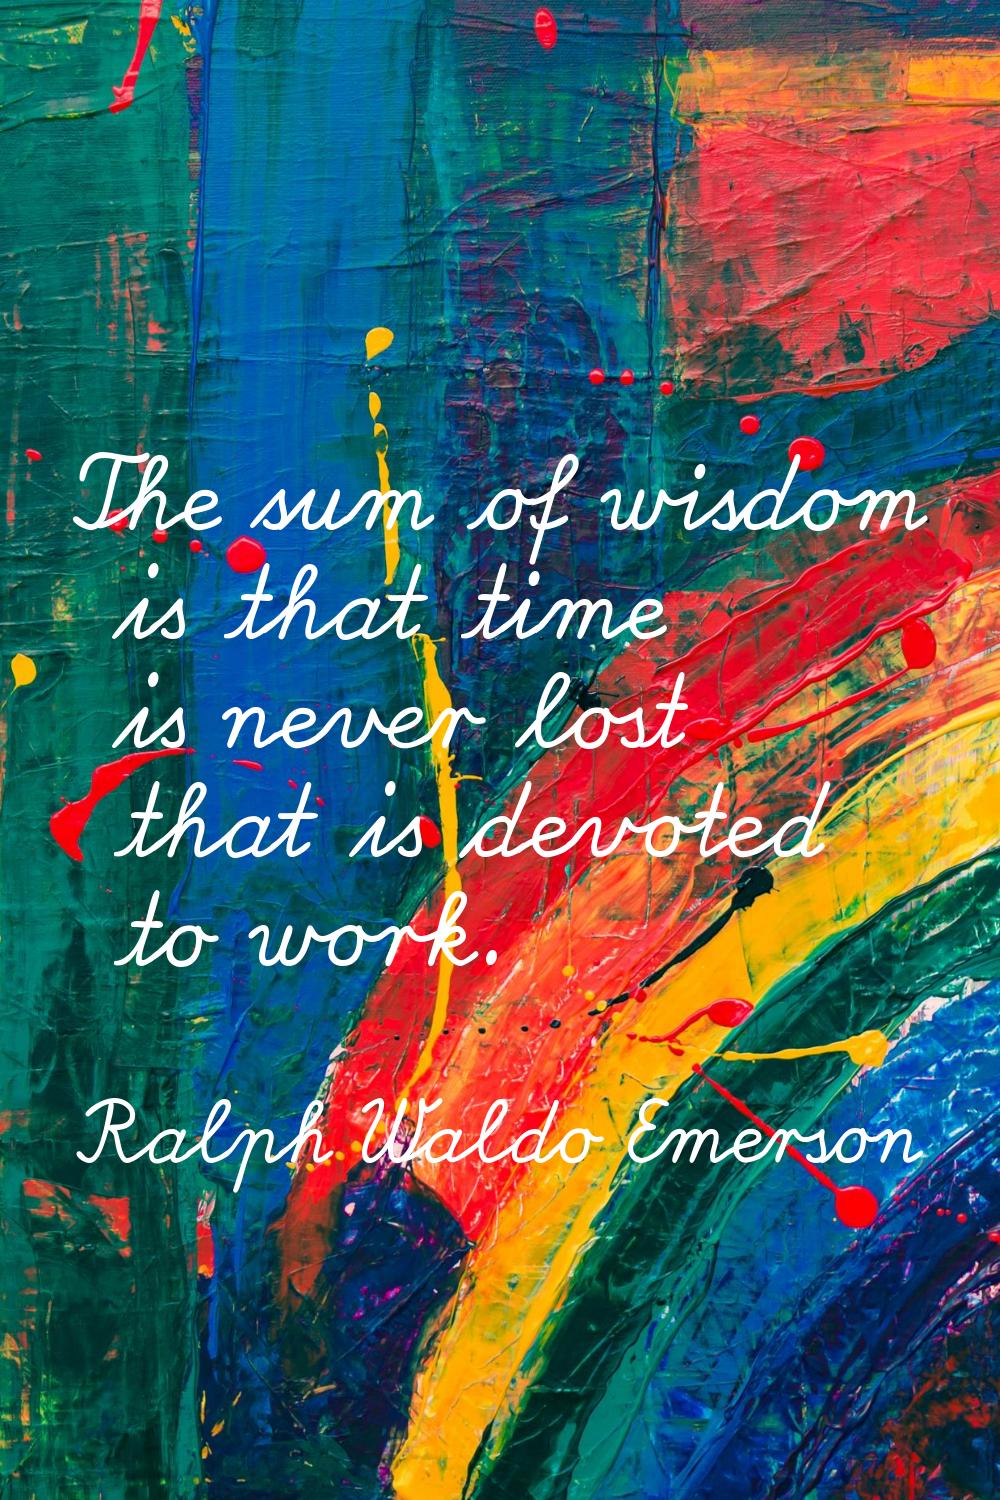 The sum of wisdom is that time is never lost that is devoted to work.